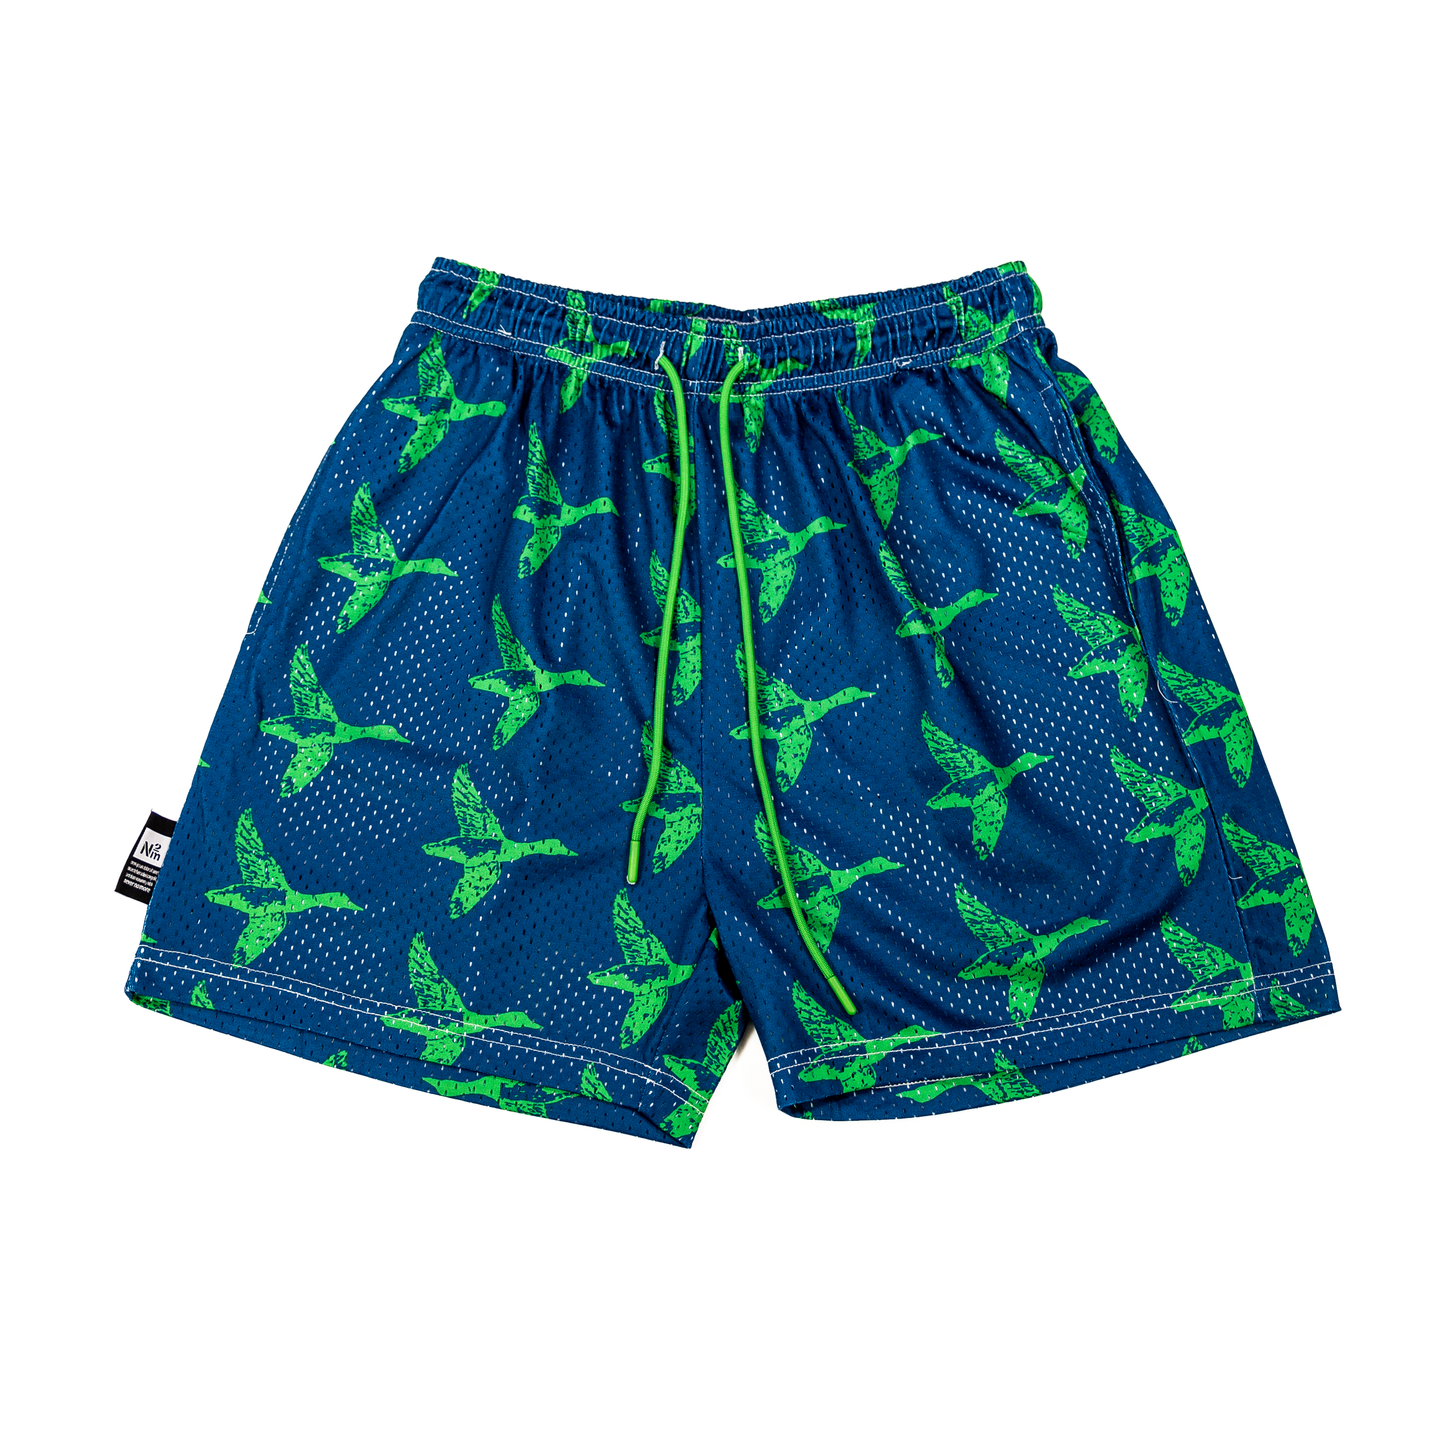 Flying Duck Mesh Shorts, Blue/Green - Layr Official